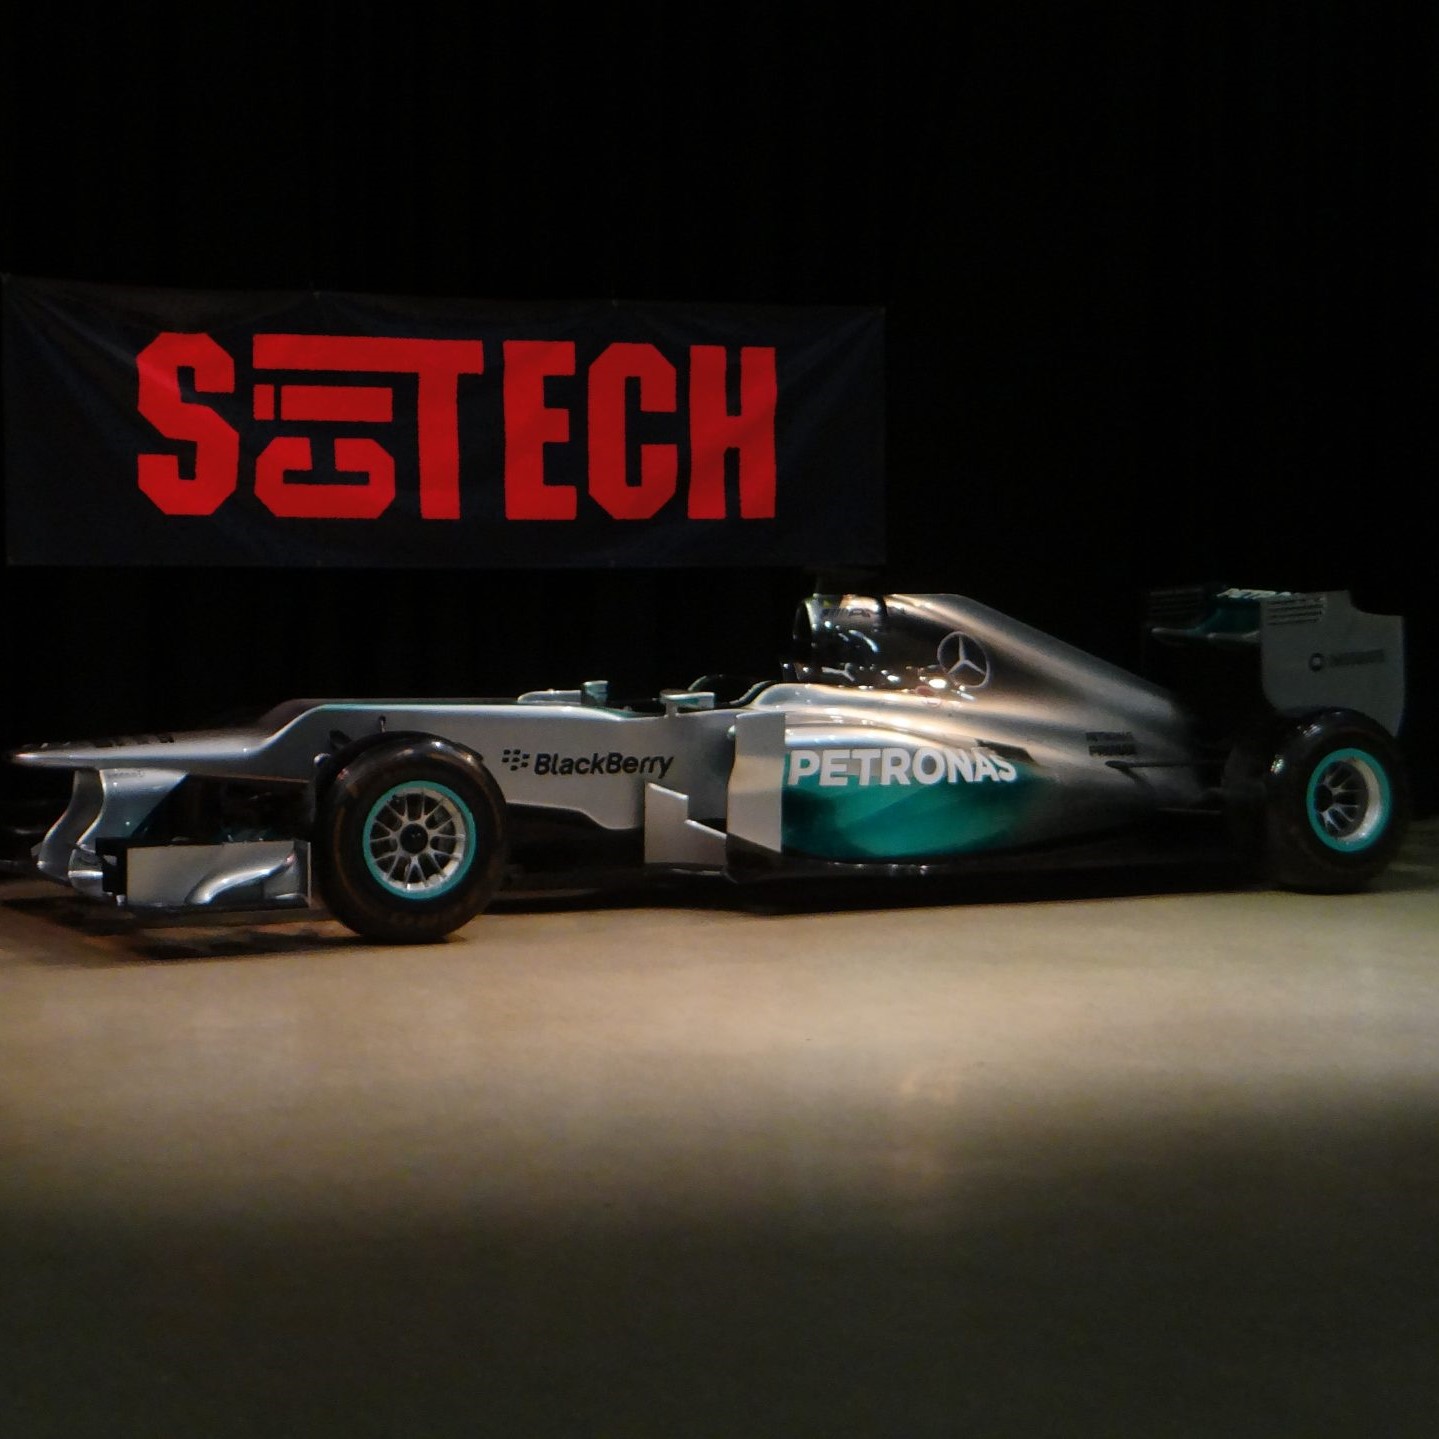 The Mercedes F1 car at SciTech